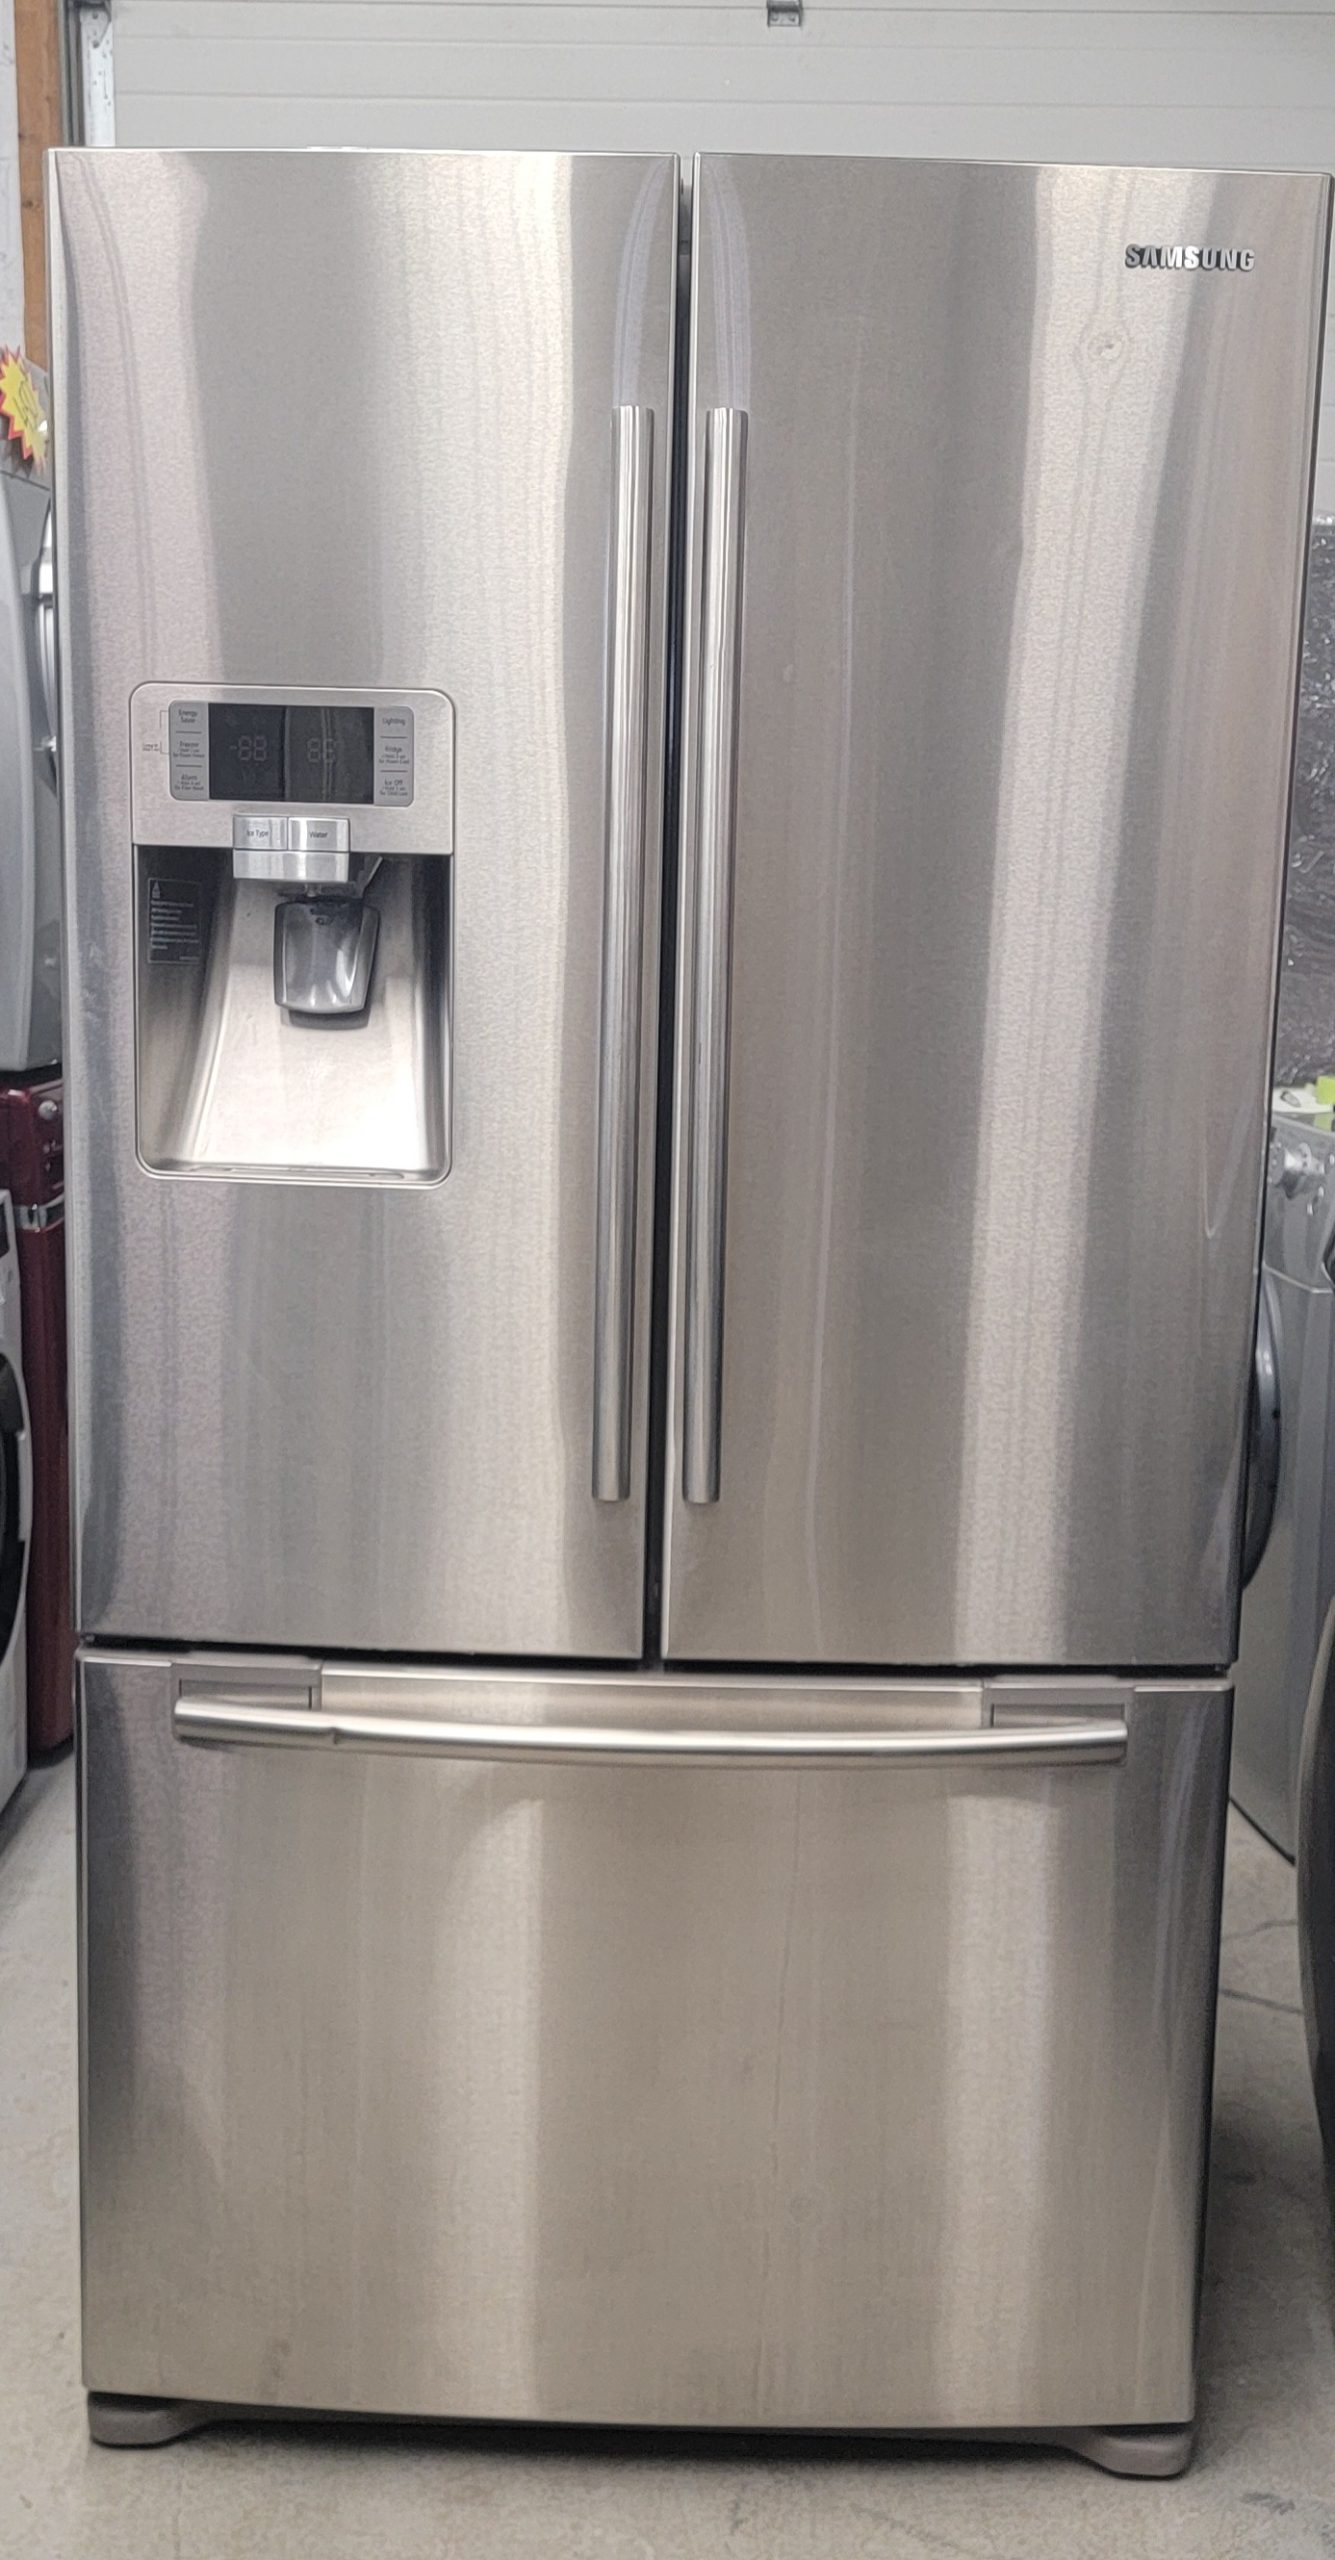 Order Your Used Refrigerator Samsung Rfg297aars Today!